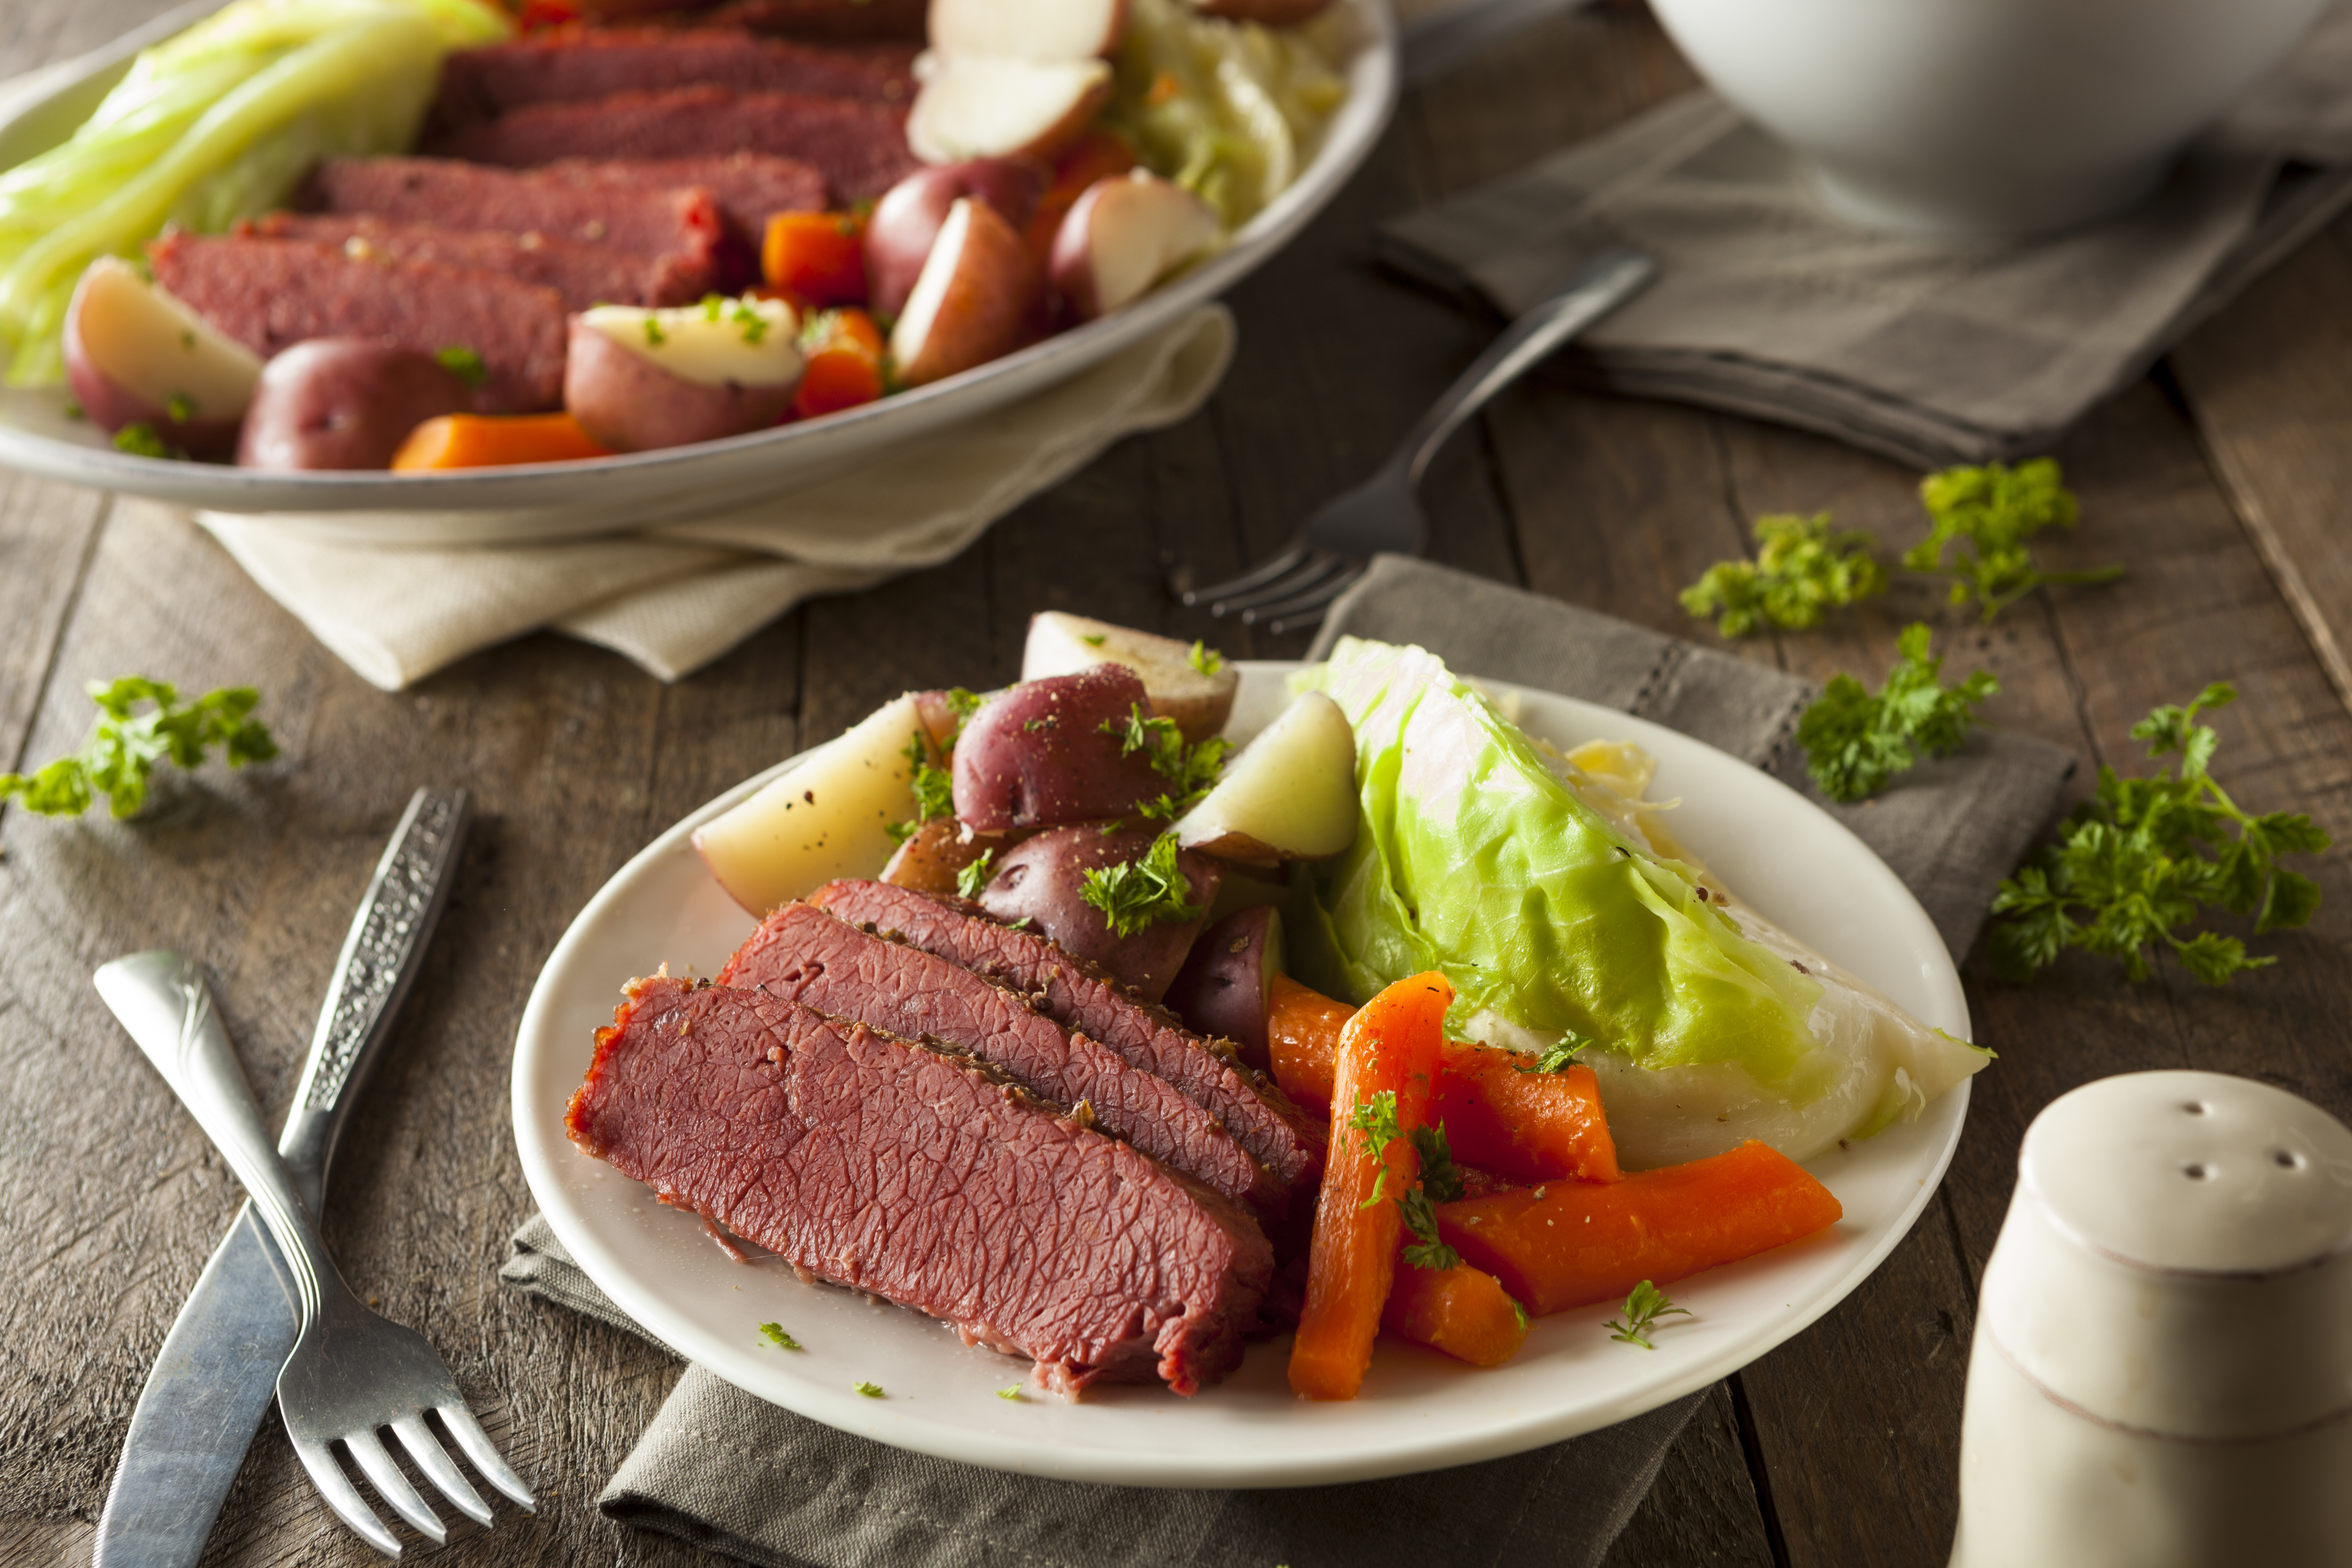 Corned-Beef-and-Cabbage